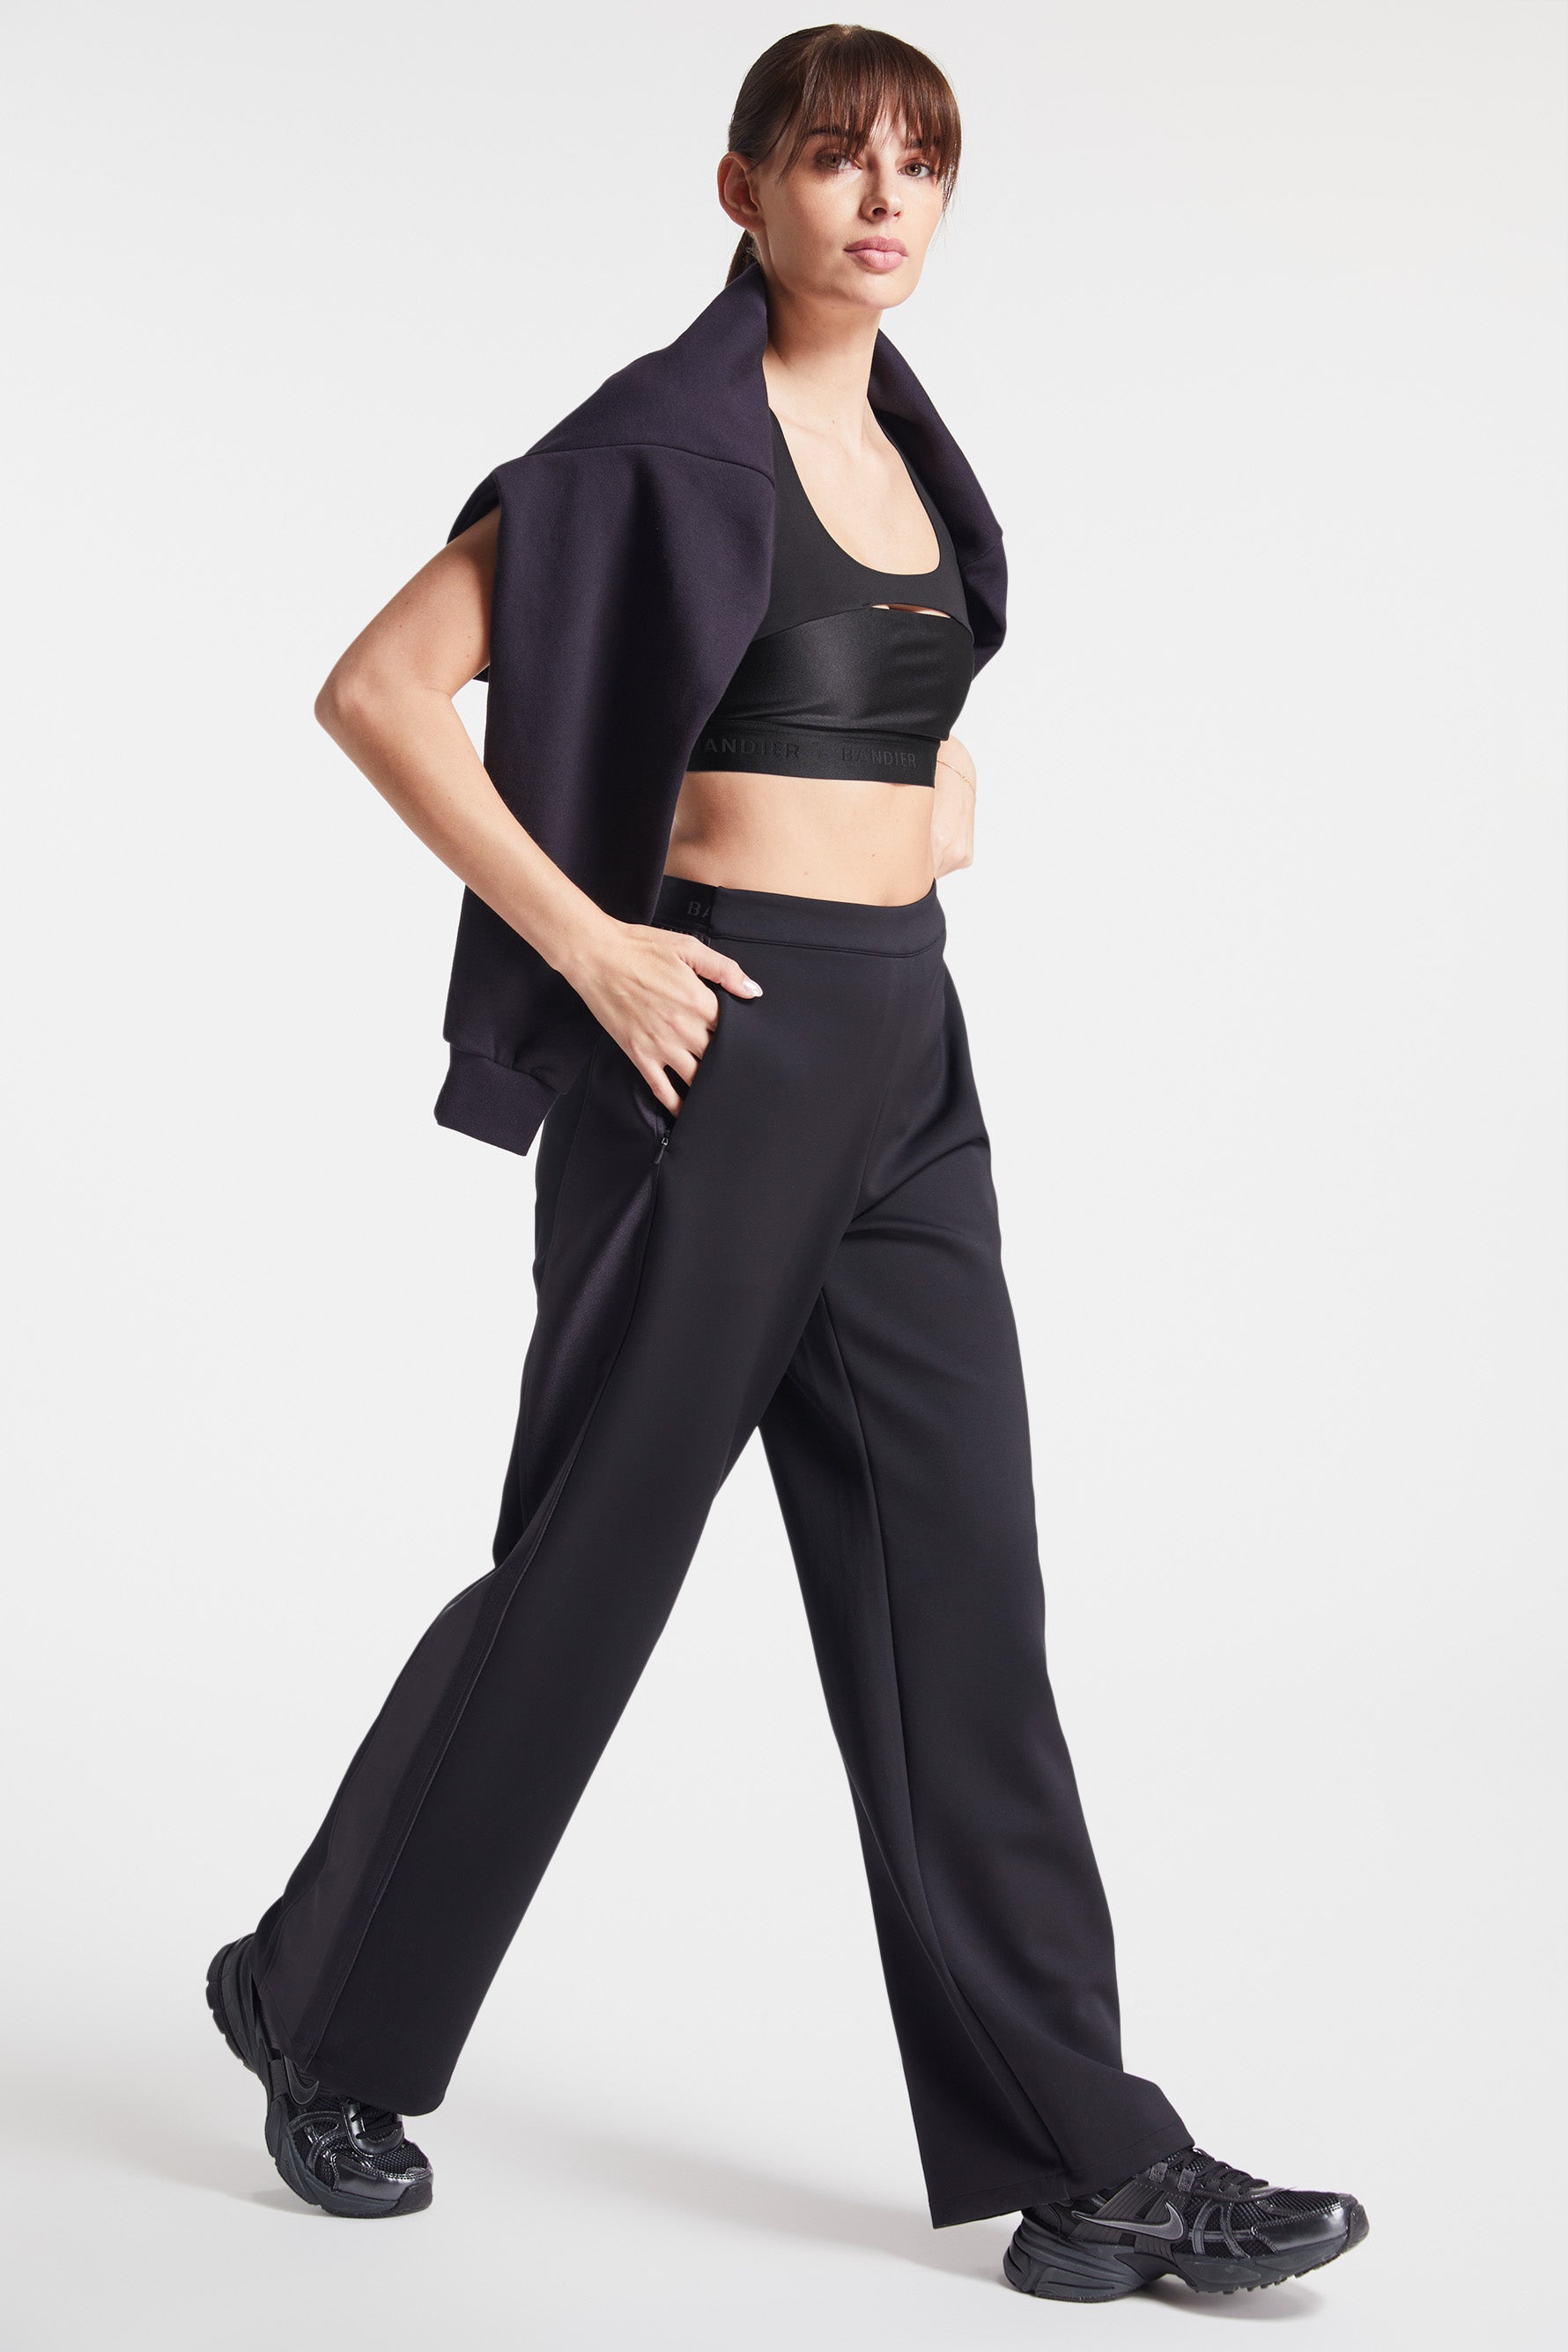 BC Brands merges US' Bandier & Carbon38 in luxury activewear move